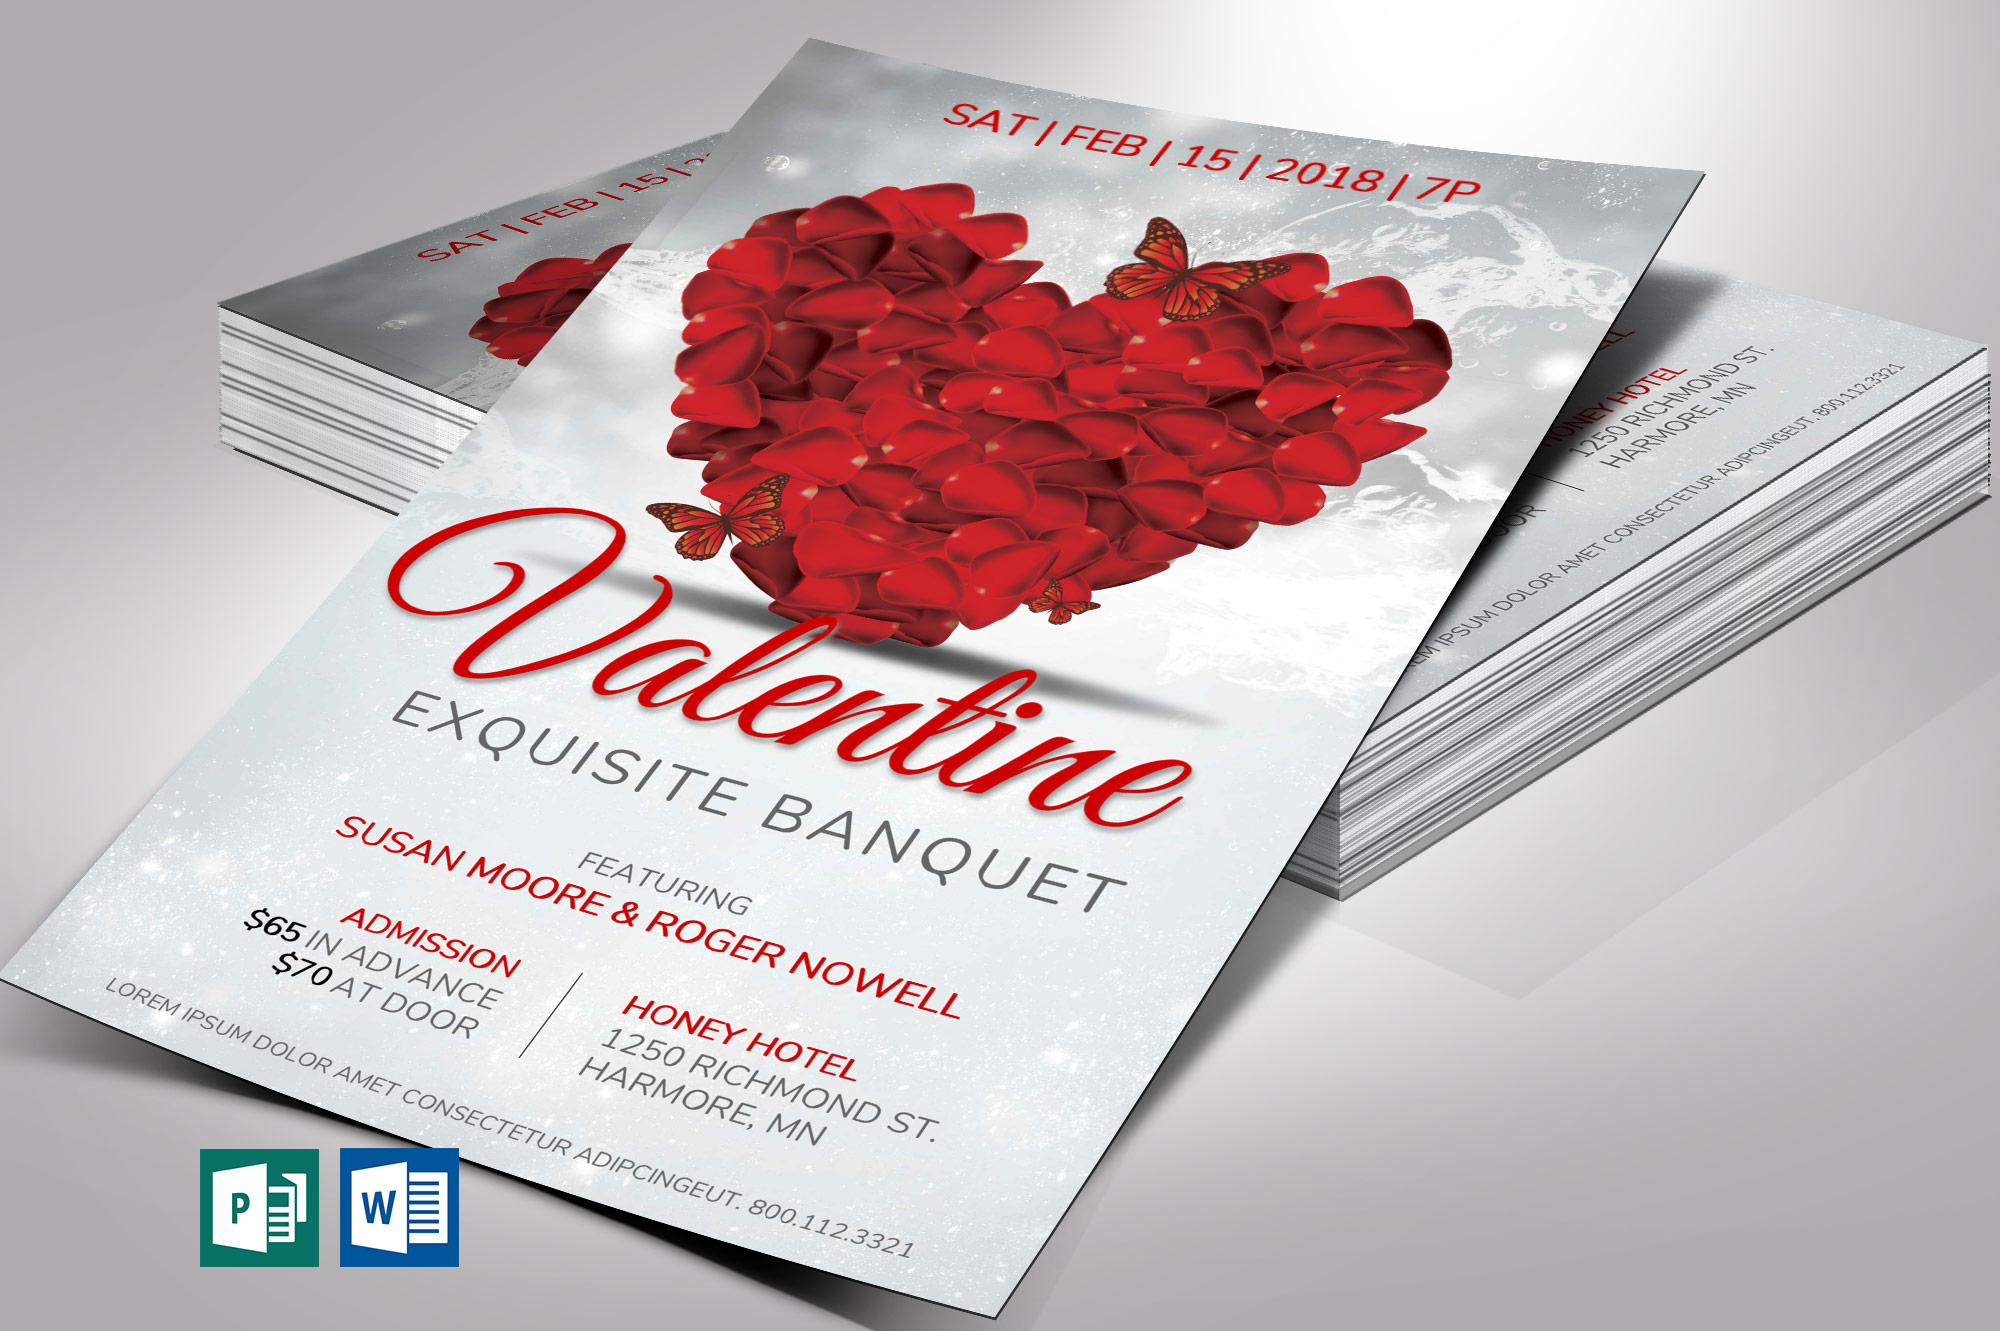 Petals Valentines Day Banquet Flyer Template, a Word Template and Publisher Template set is 5.5x8.5 inches. It features a red heart created with rose petals and butterflies